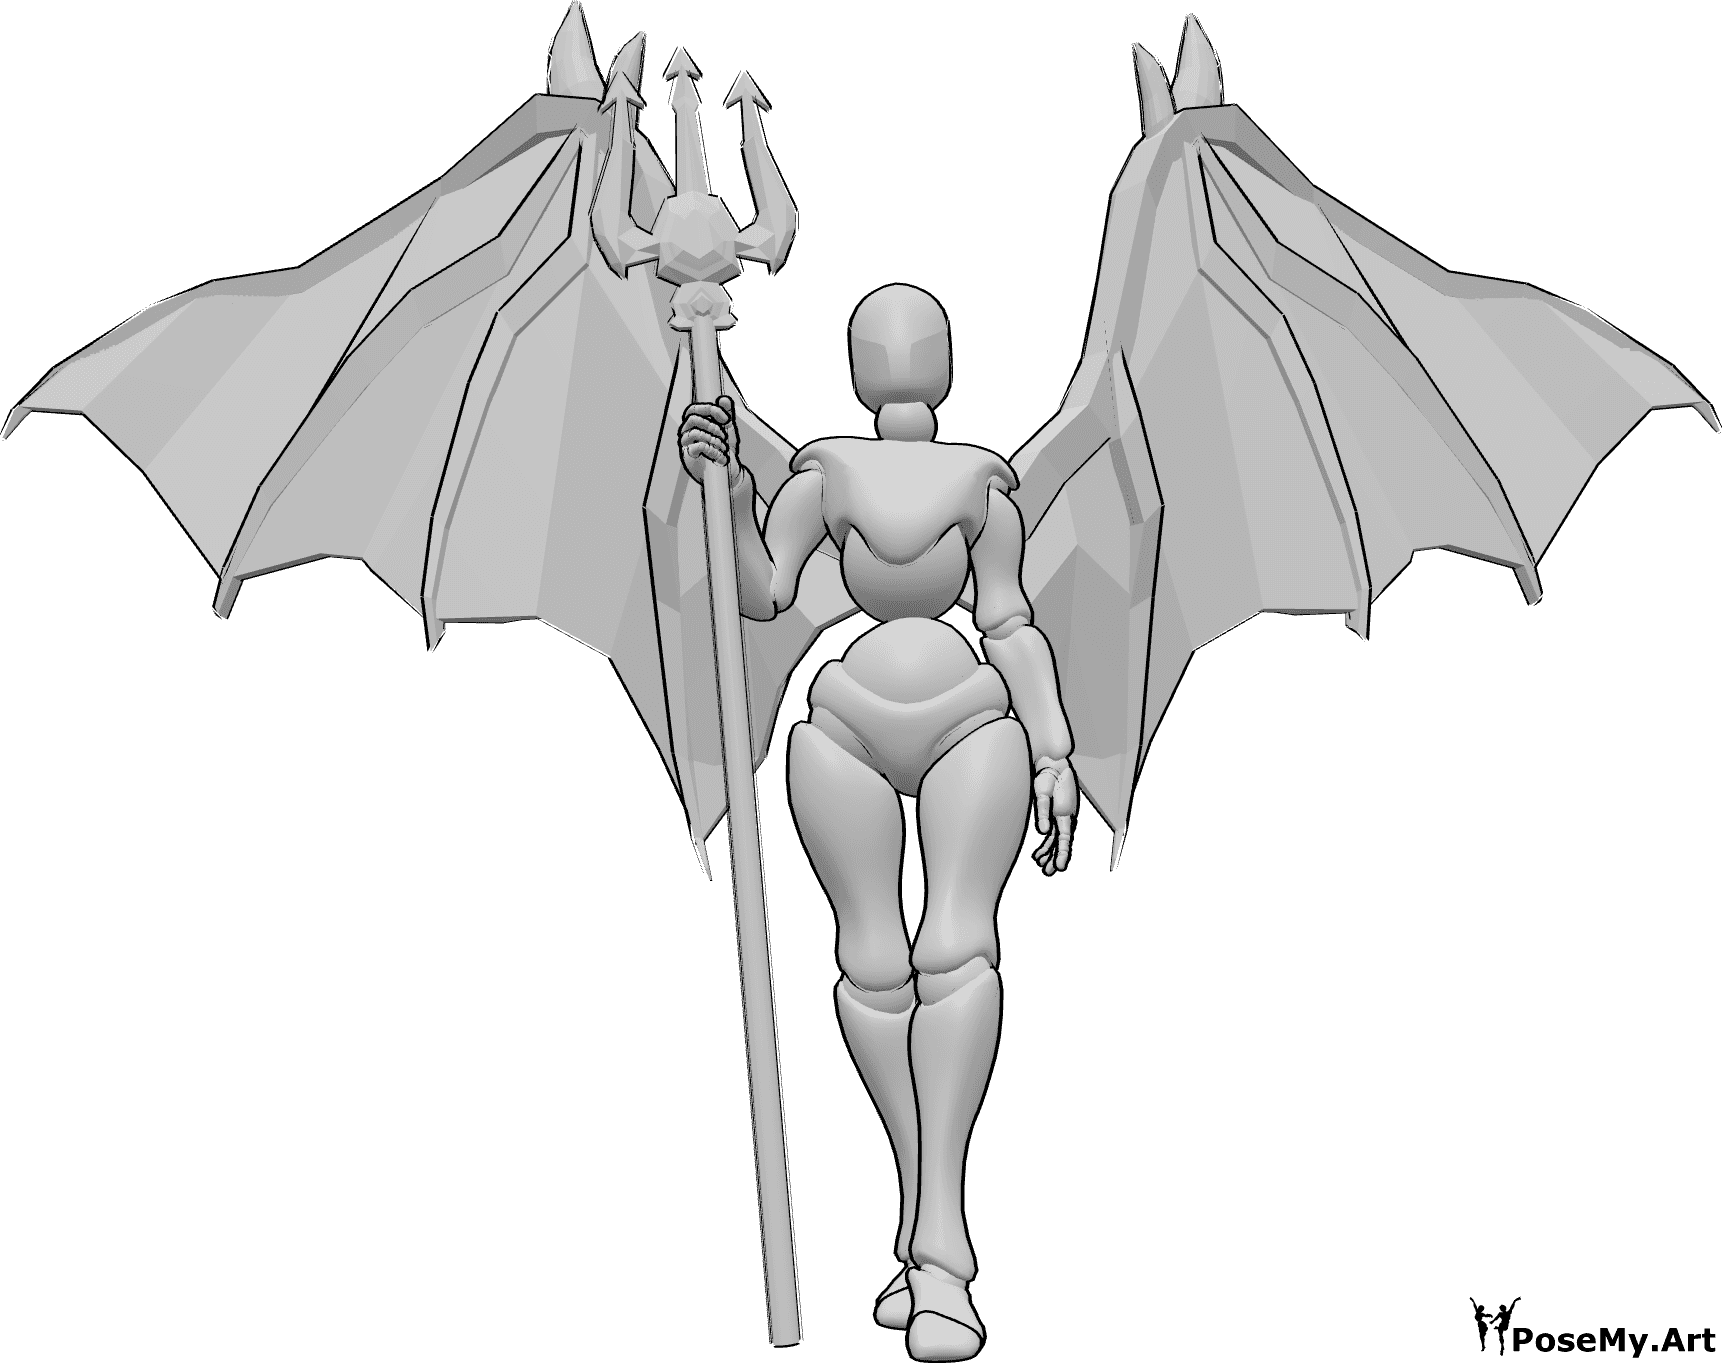 Pose Reference- Demon walking pose - Female demon is walking, holding the trident in her right hand and looking forward